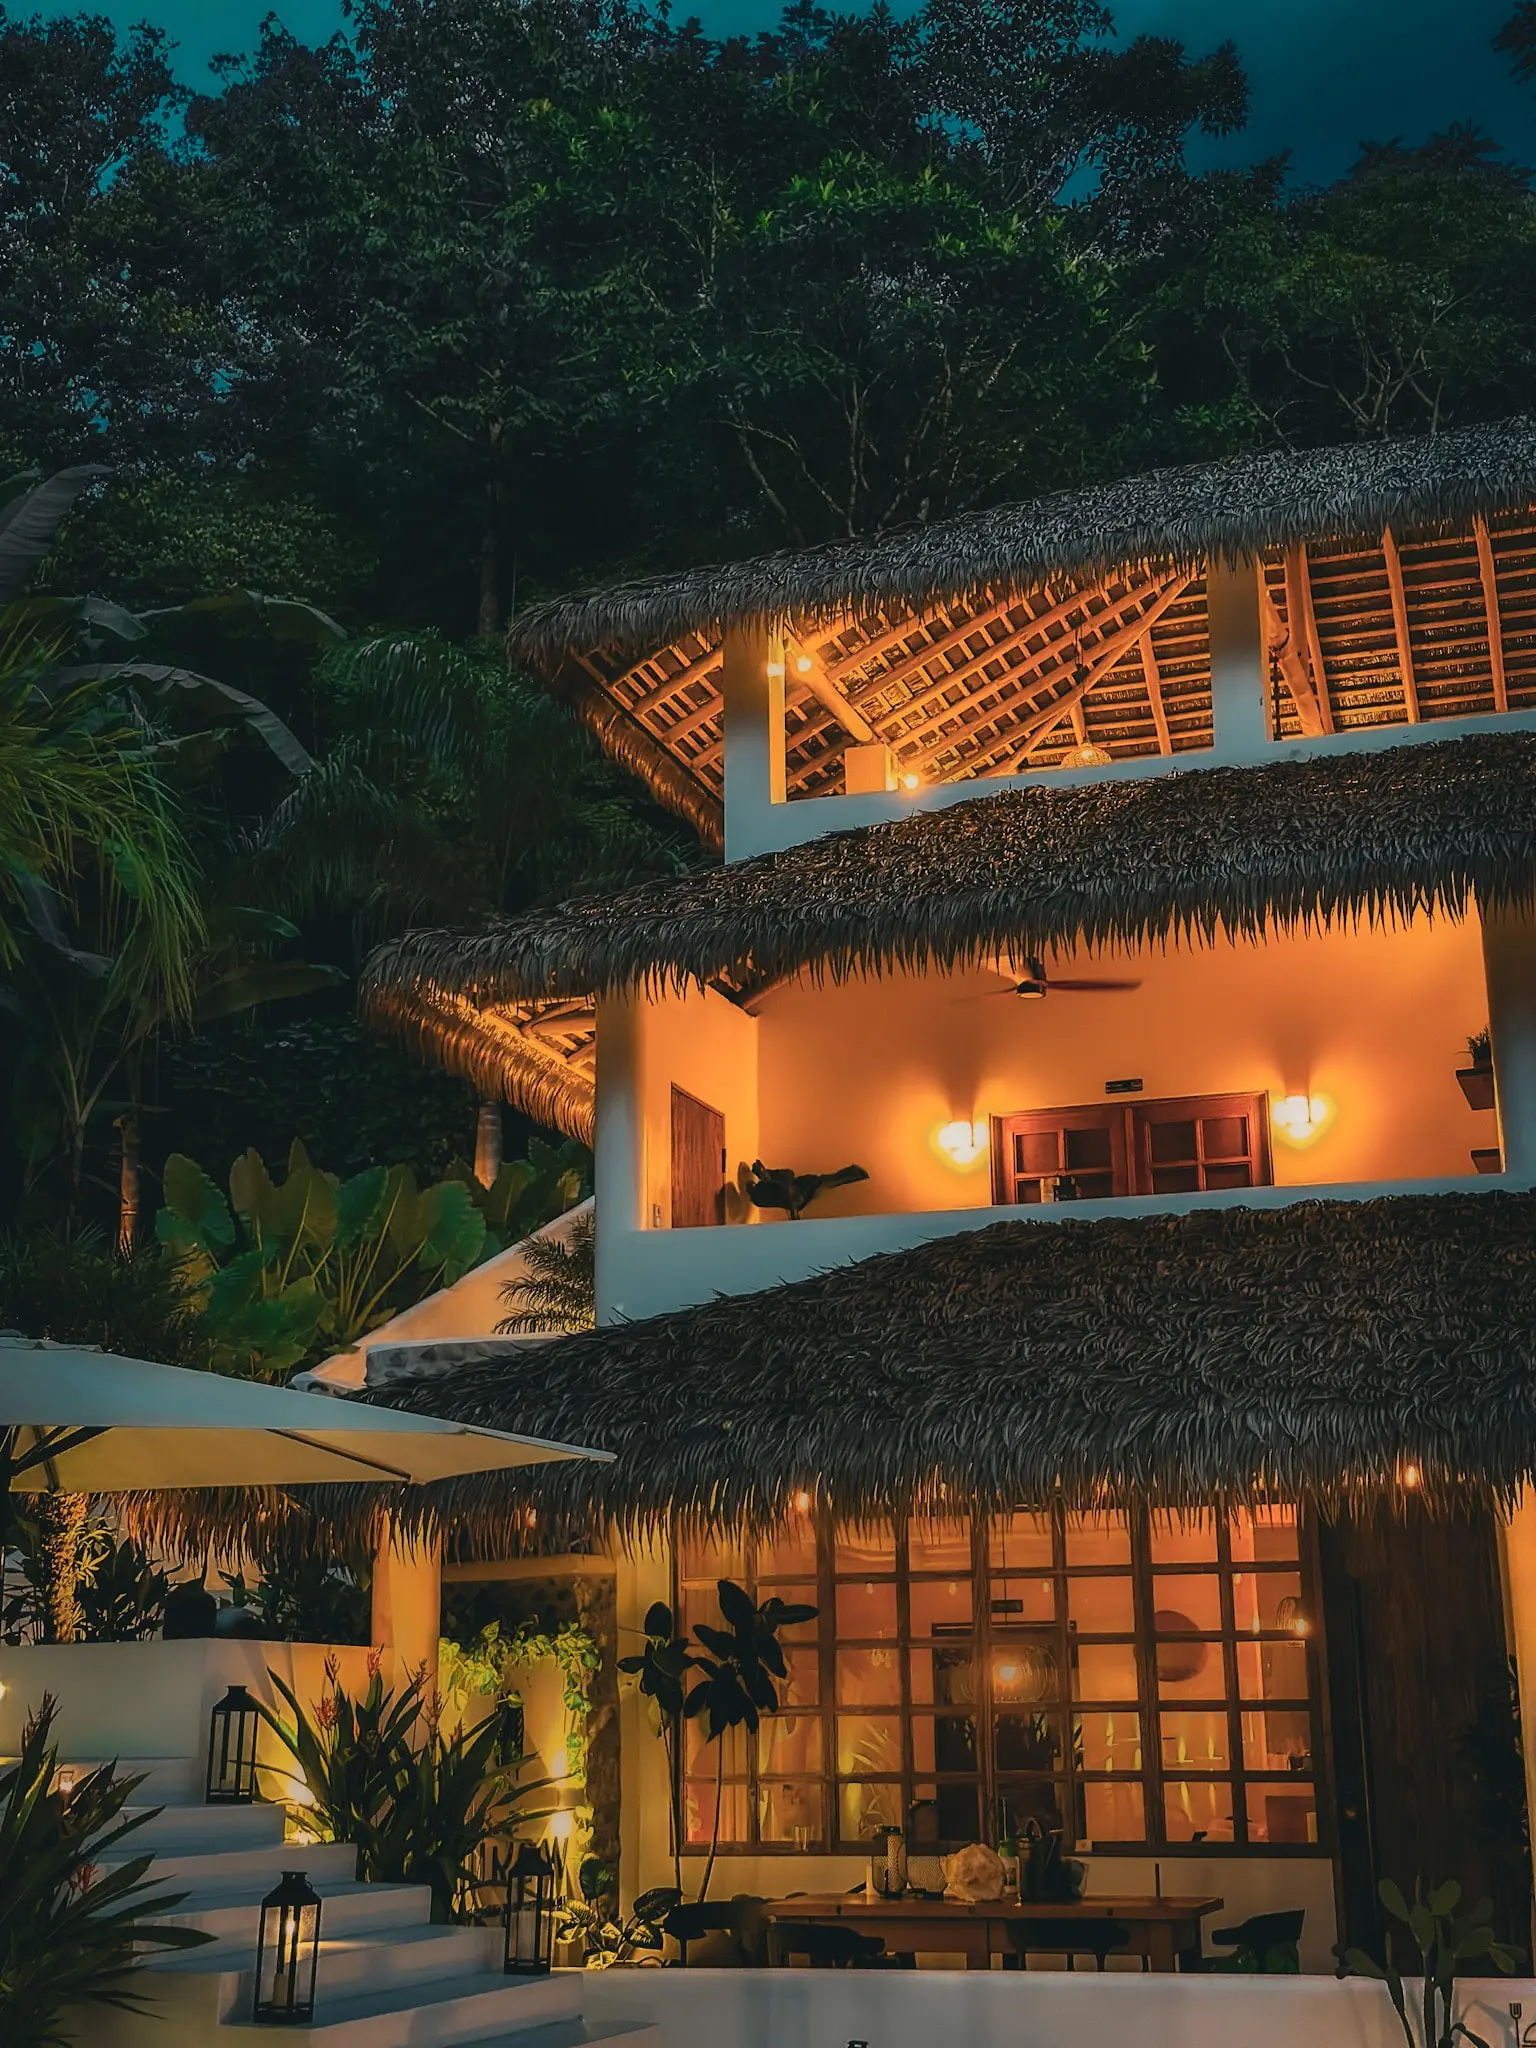 Alt text: A stunning view of Vayu Retreat Villas at dusk, showcasing the beautifully illuminated thatched-roof structure surrounded by lush jungle greenery. This enchanting image highlights one of the best hotels in Uvita, Costa Rica, perfect for those seeking a serene and luxurious jungle retreat.